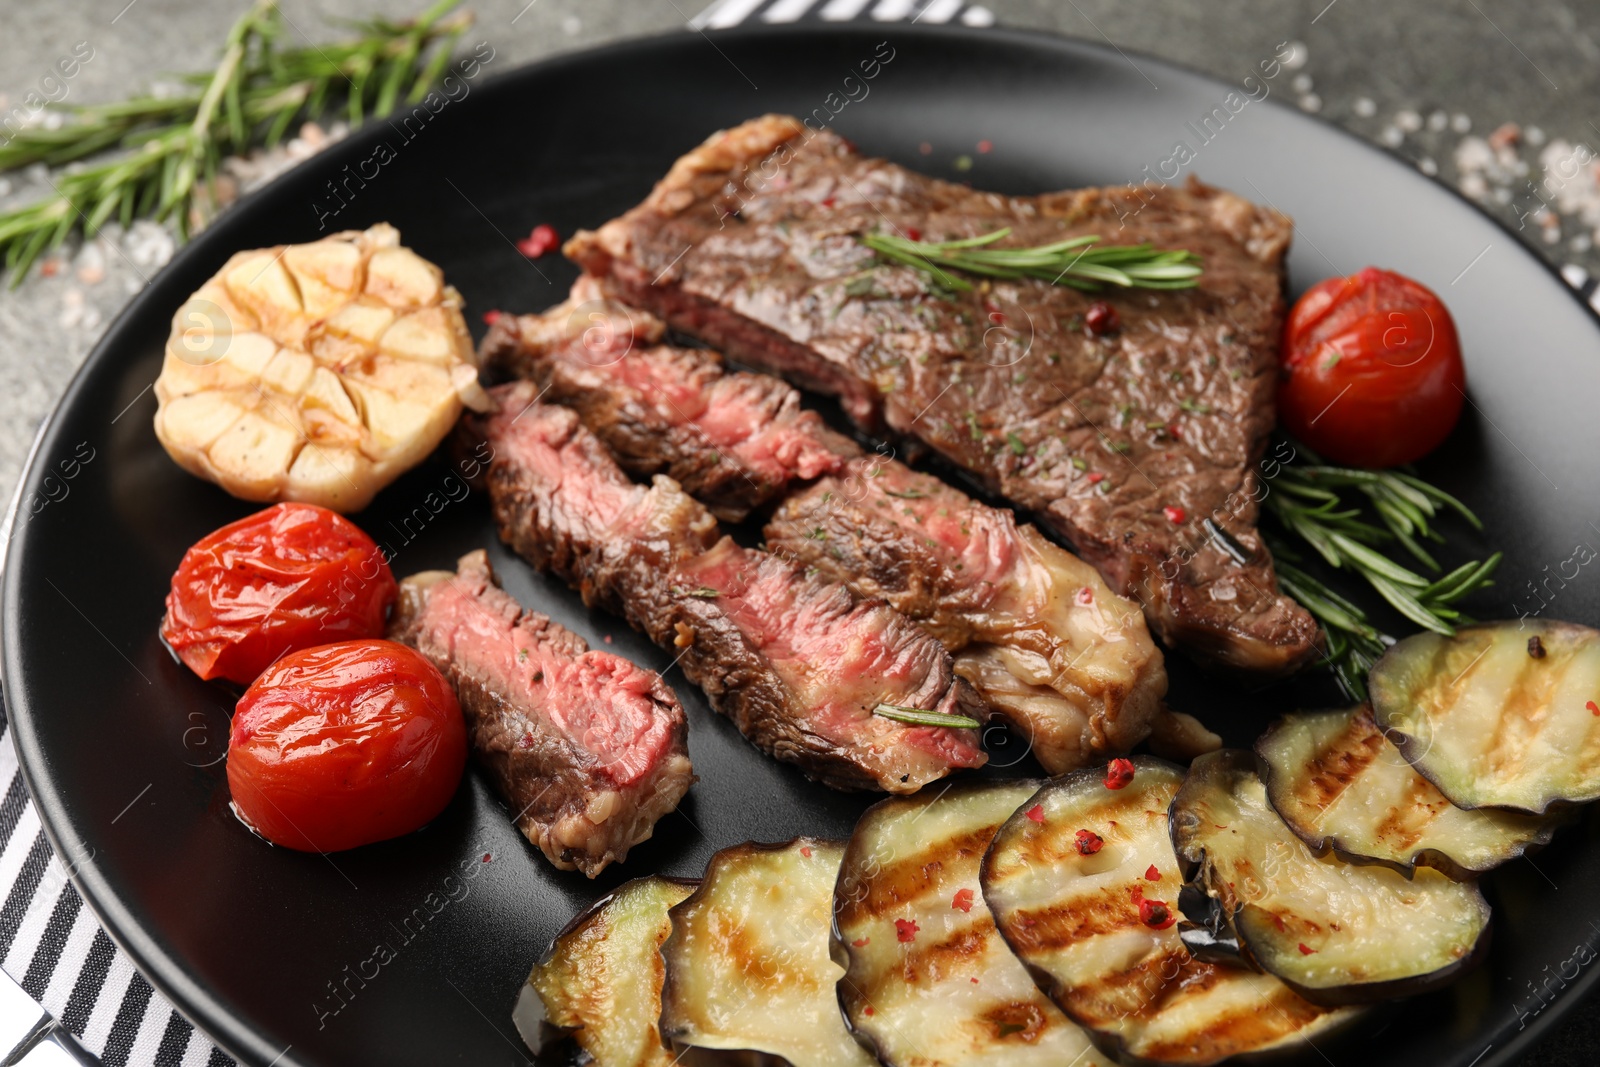 Photo of Delicious grilled beef steak with vegetables and spices on table, closeup